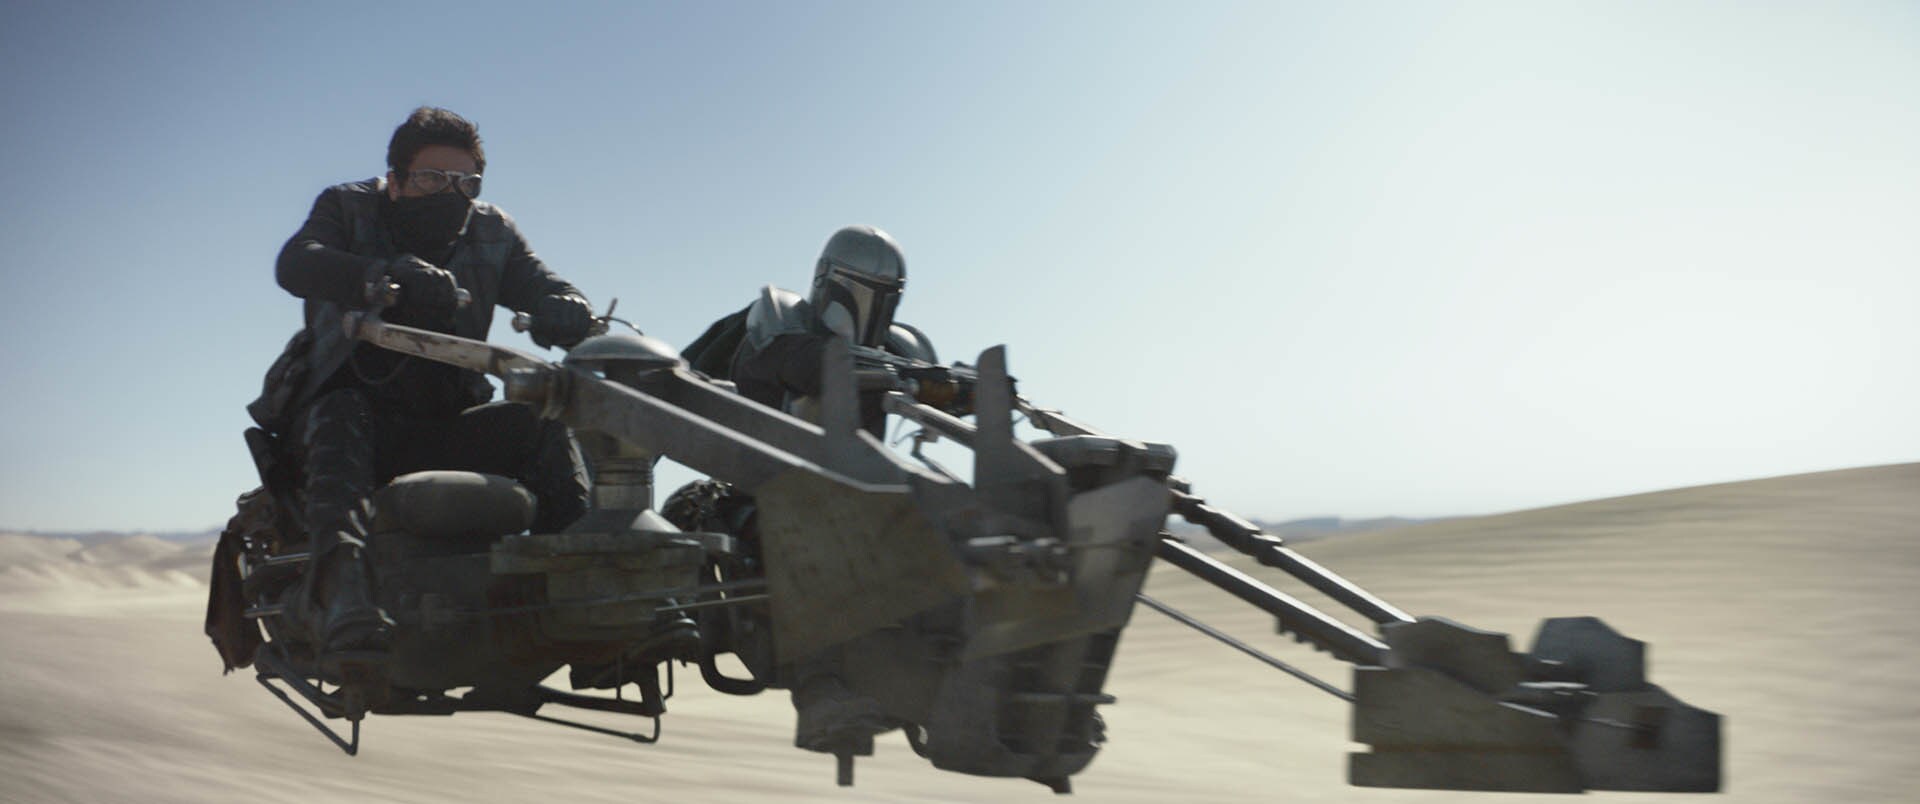 The Mandalorian and Toro set off on a pair of speeder bikes, but soon encounter Tusken Raiders an...